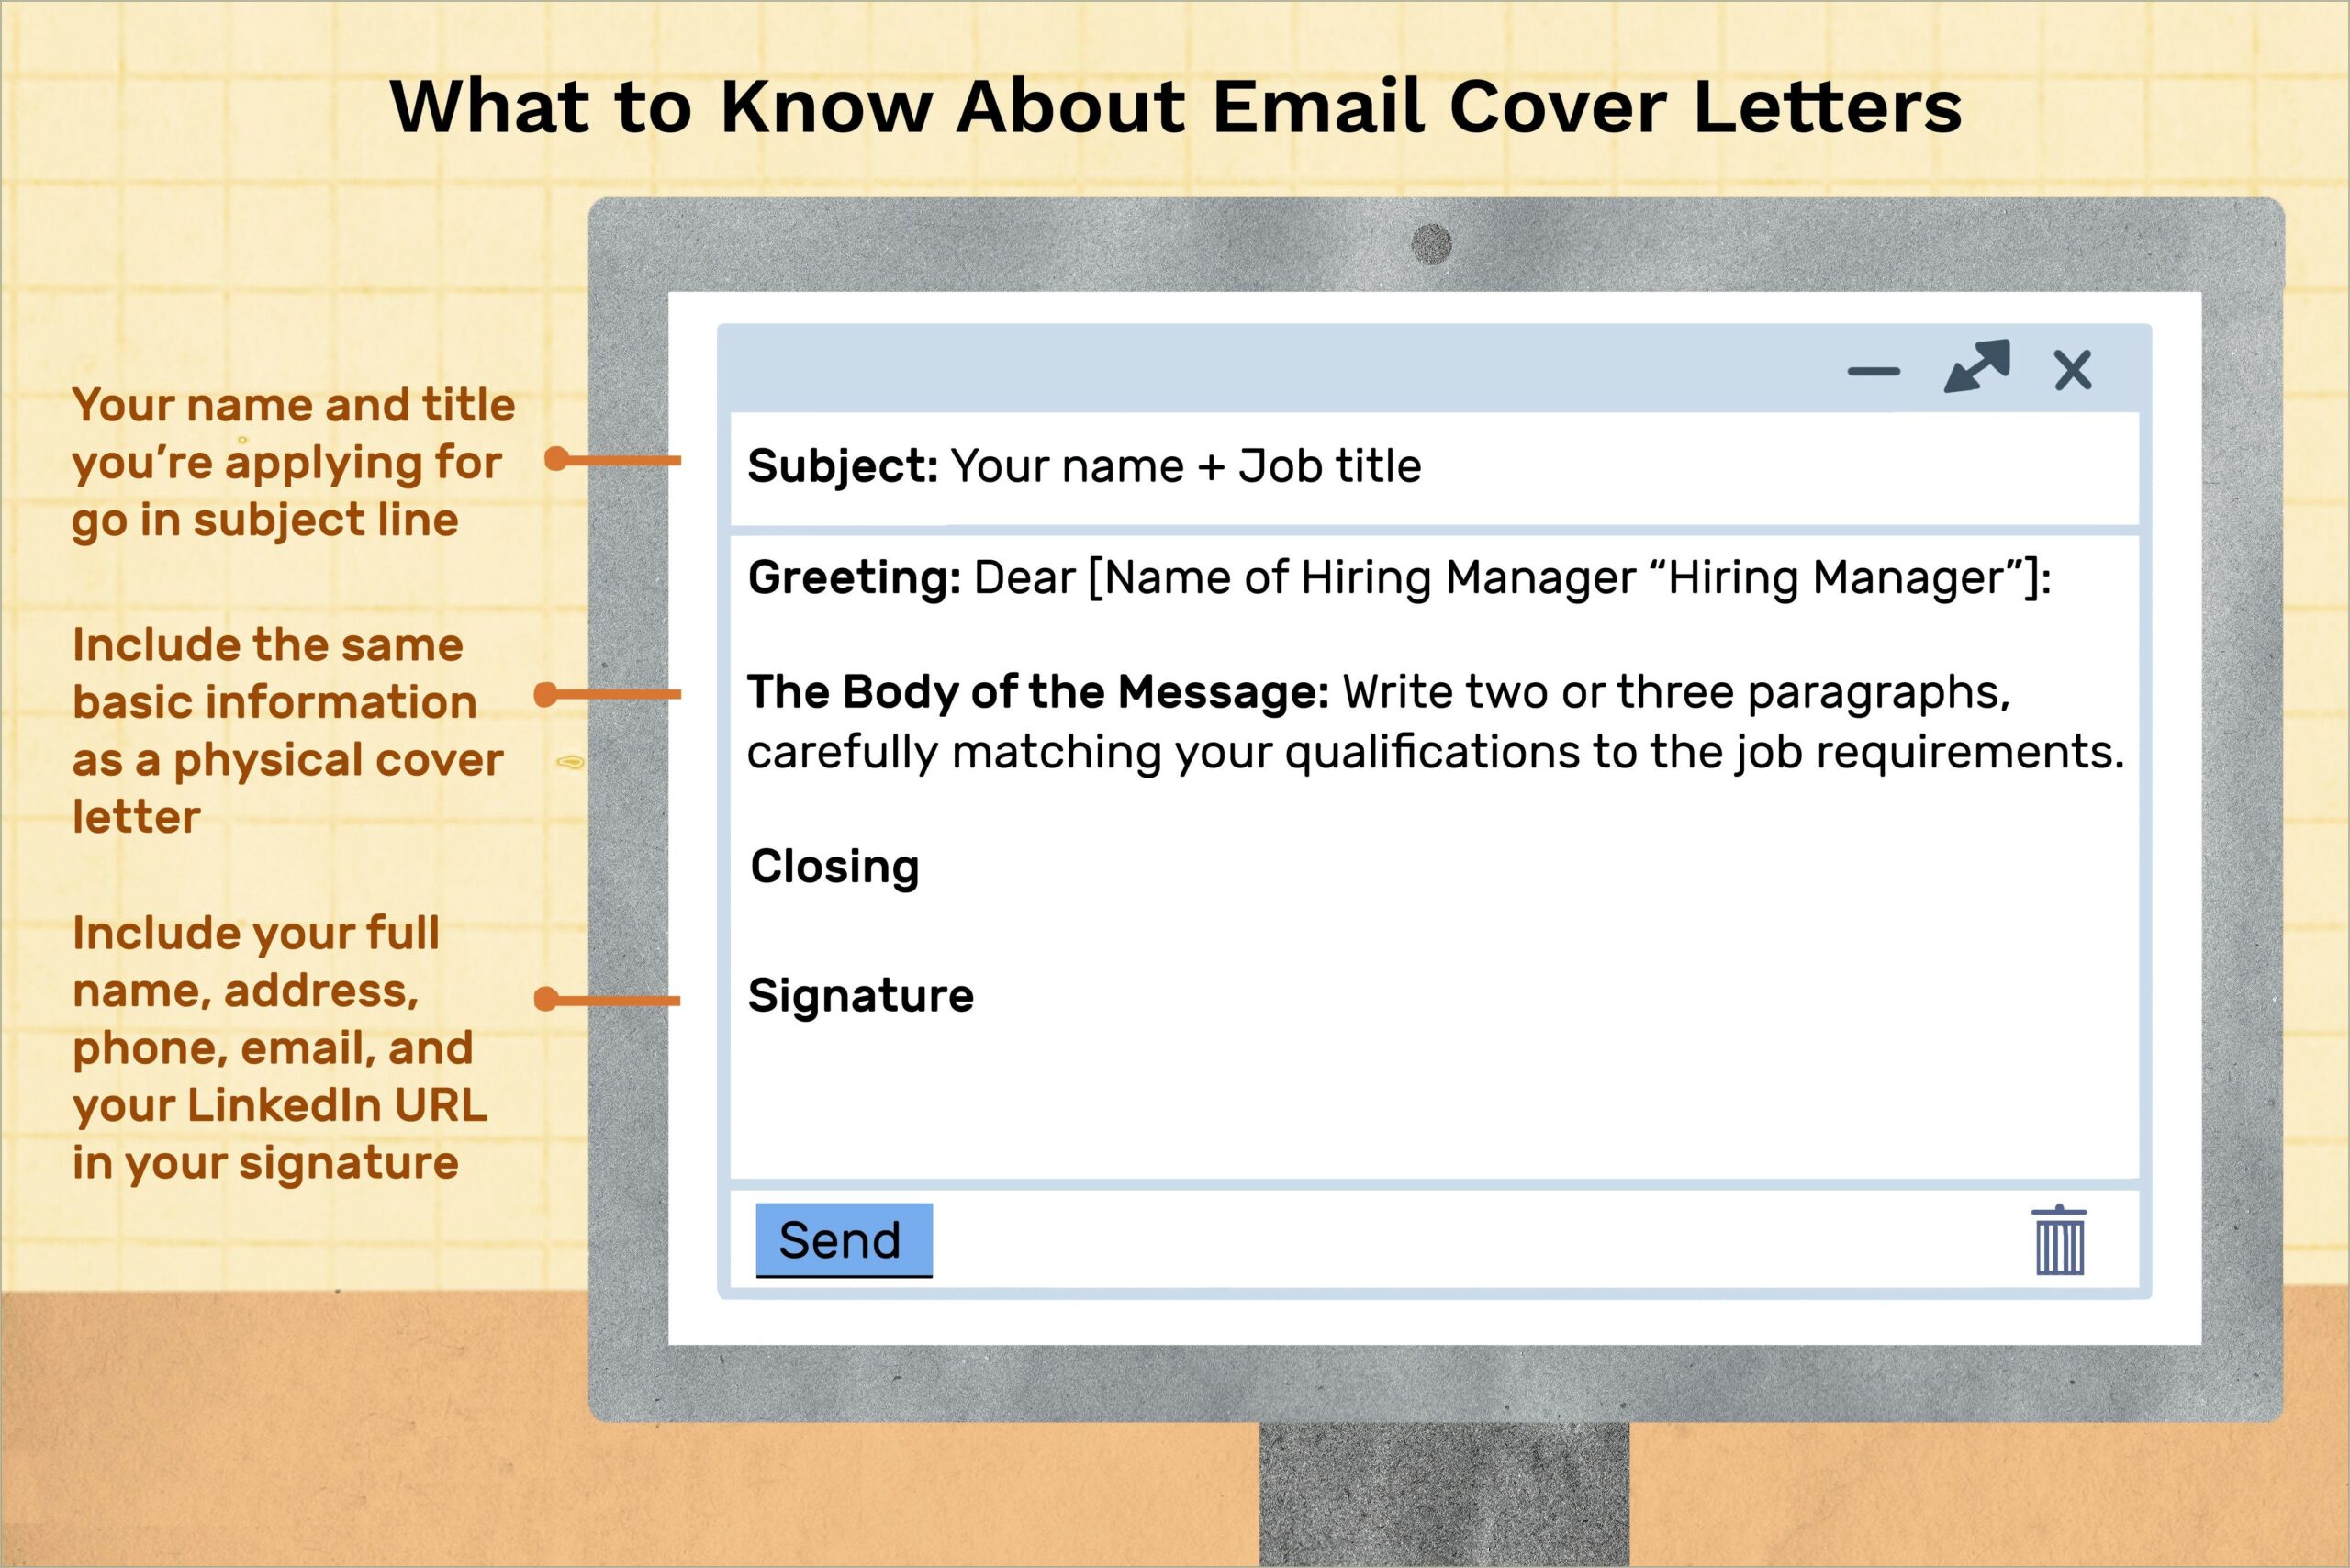 Send Email With Resume And Cover Letter